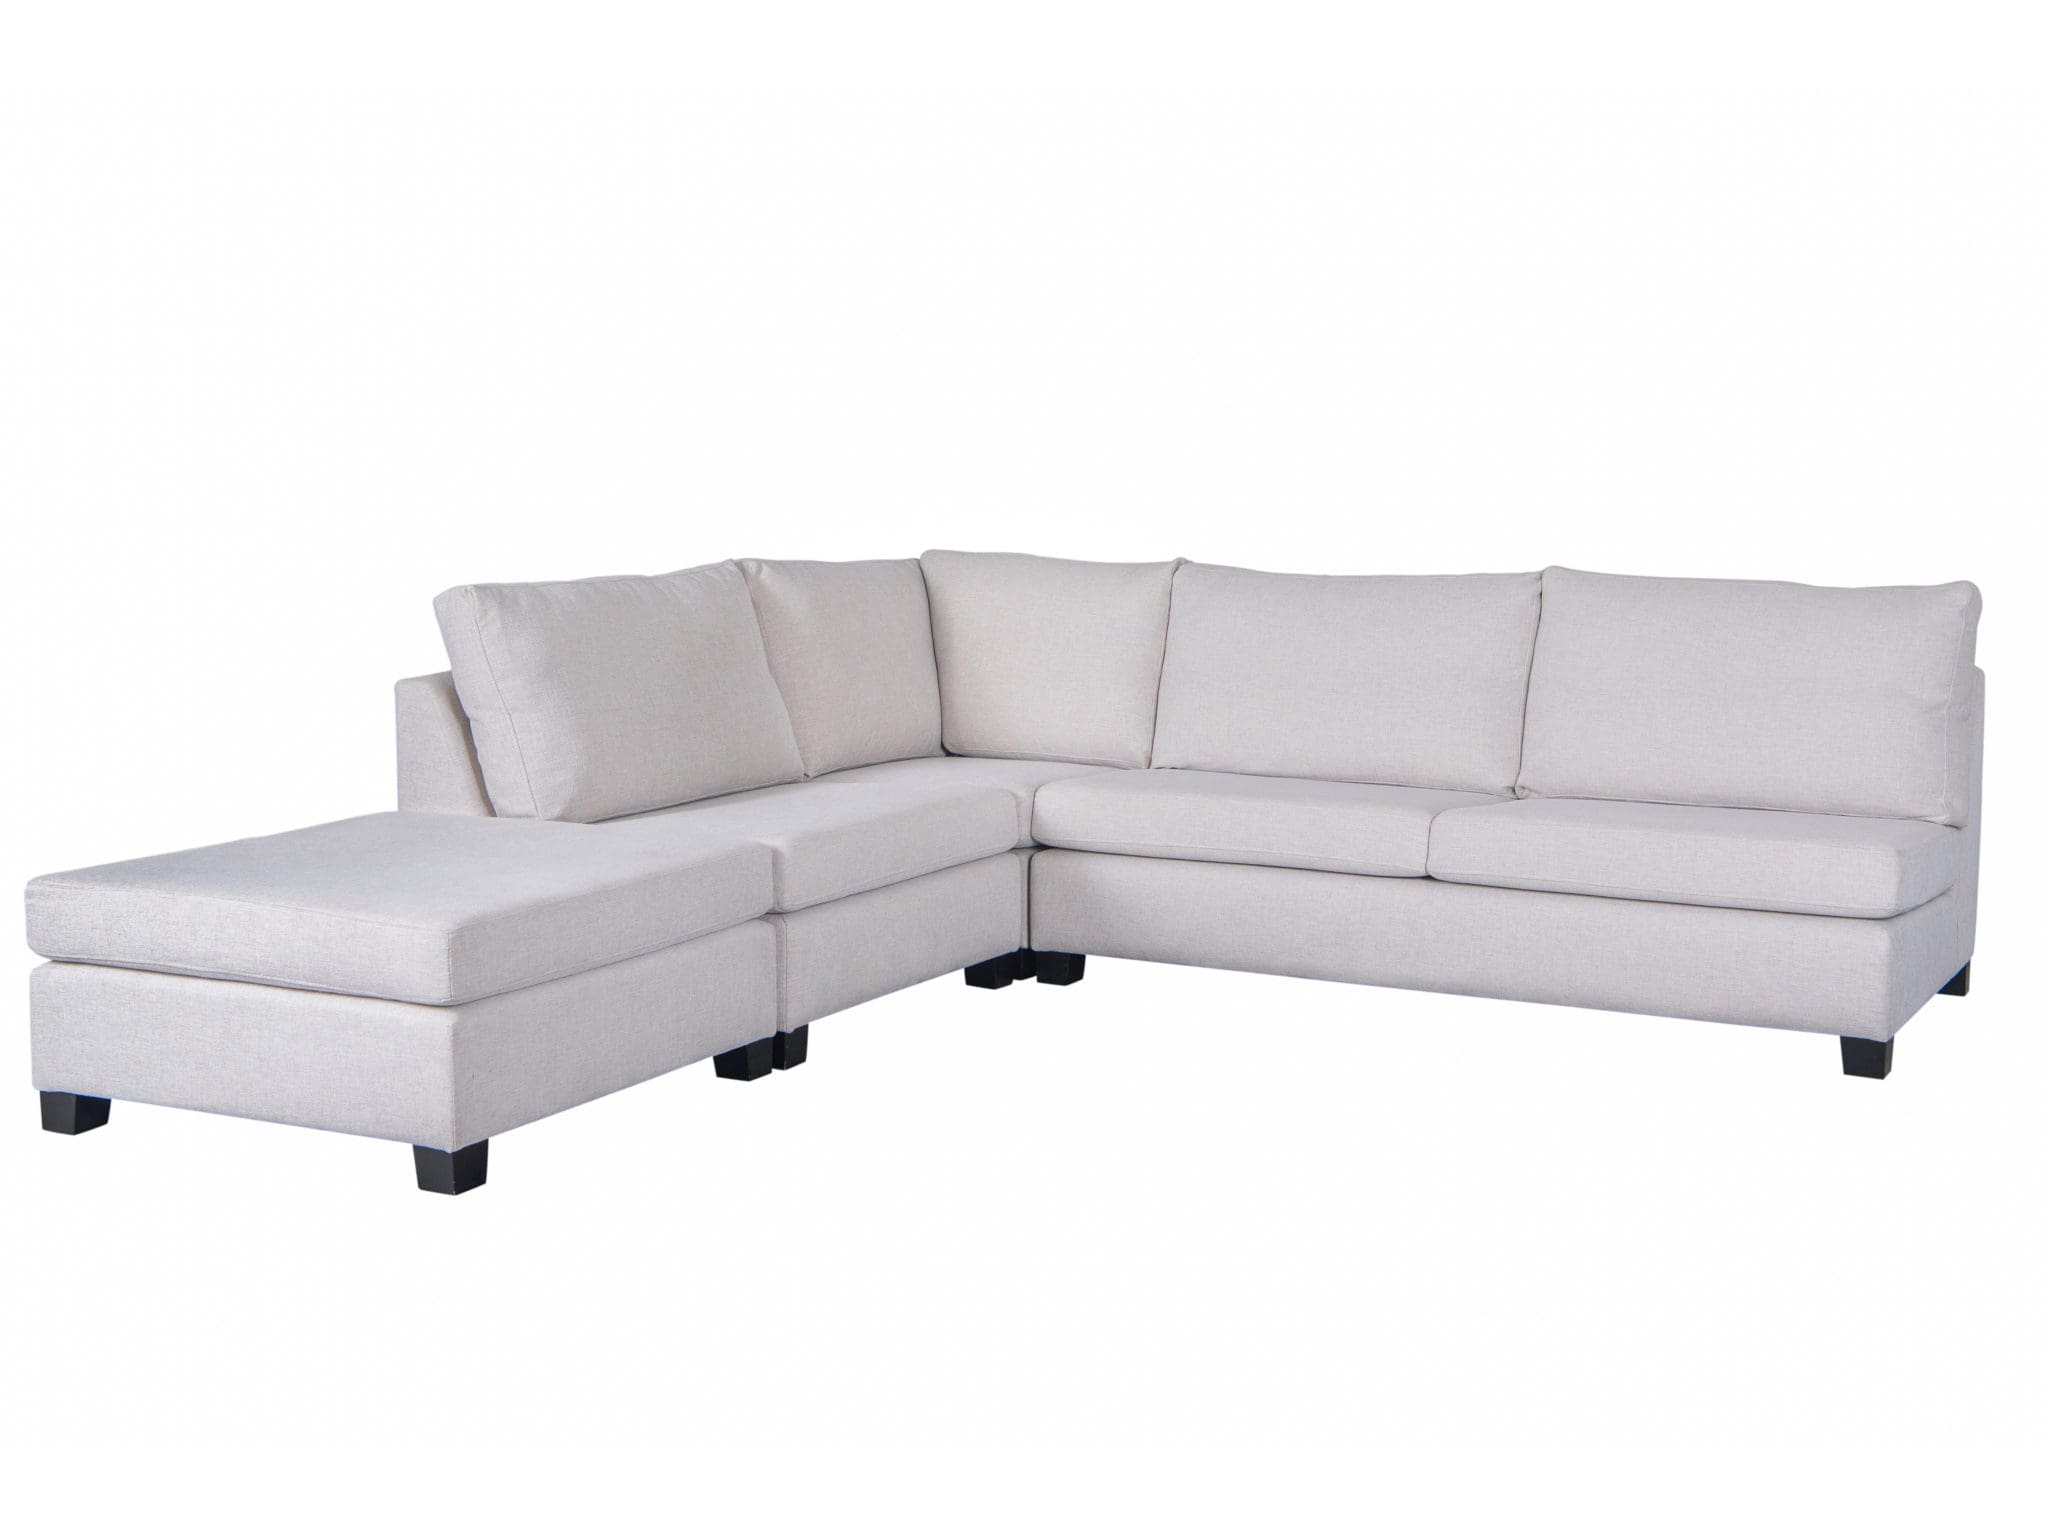 Kiwi Home Store Auckland - Beds, Sofas and home furniture